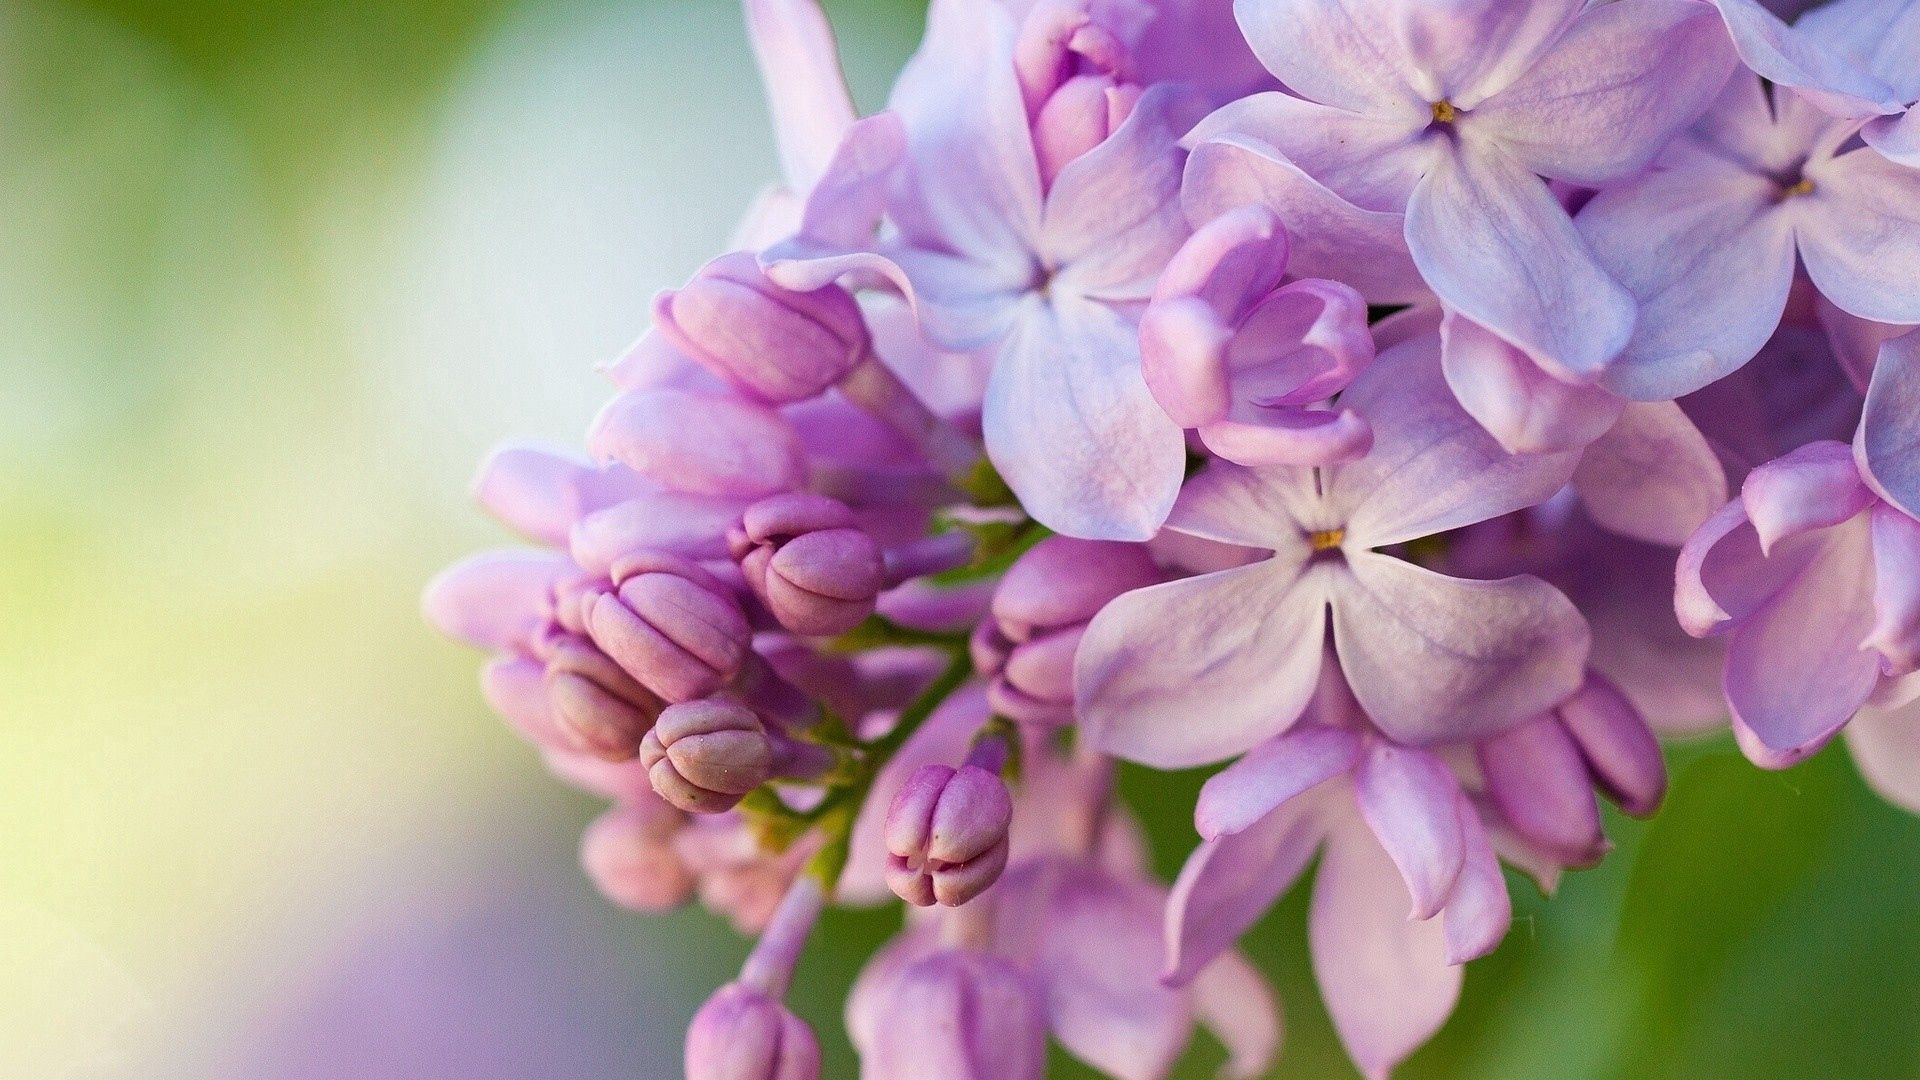 Download Wallpaper 1920x1080 Lilacs Flowers Lilac Full Hd Hdtv Fhd 1080p Hd Background